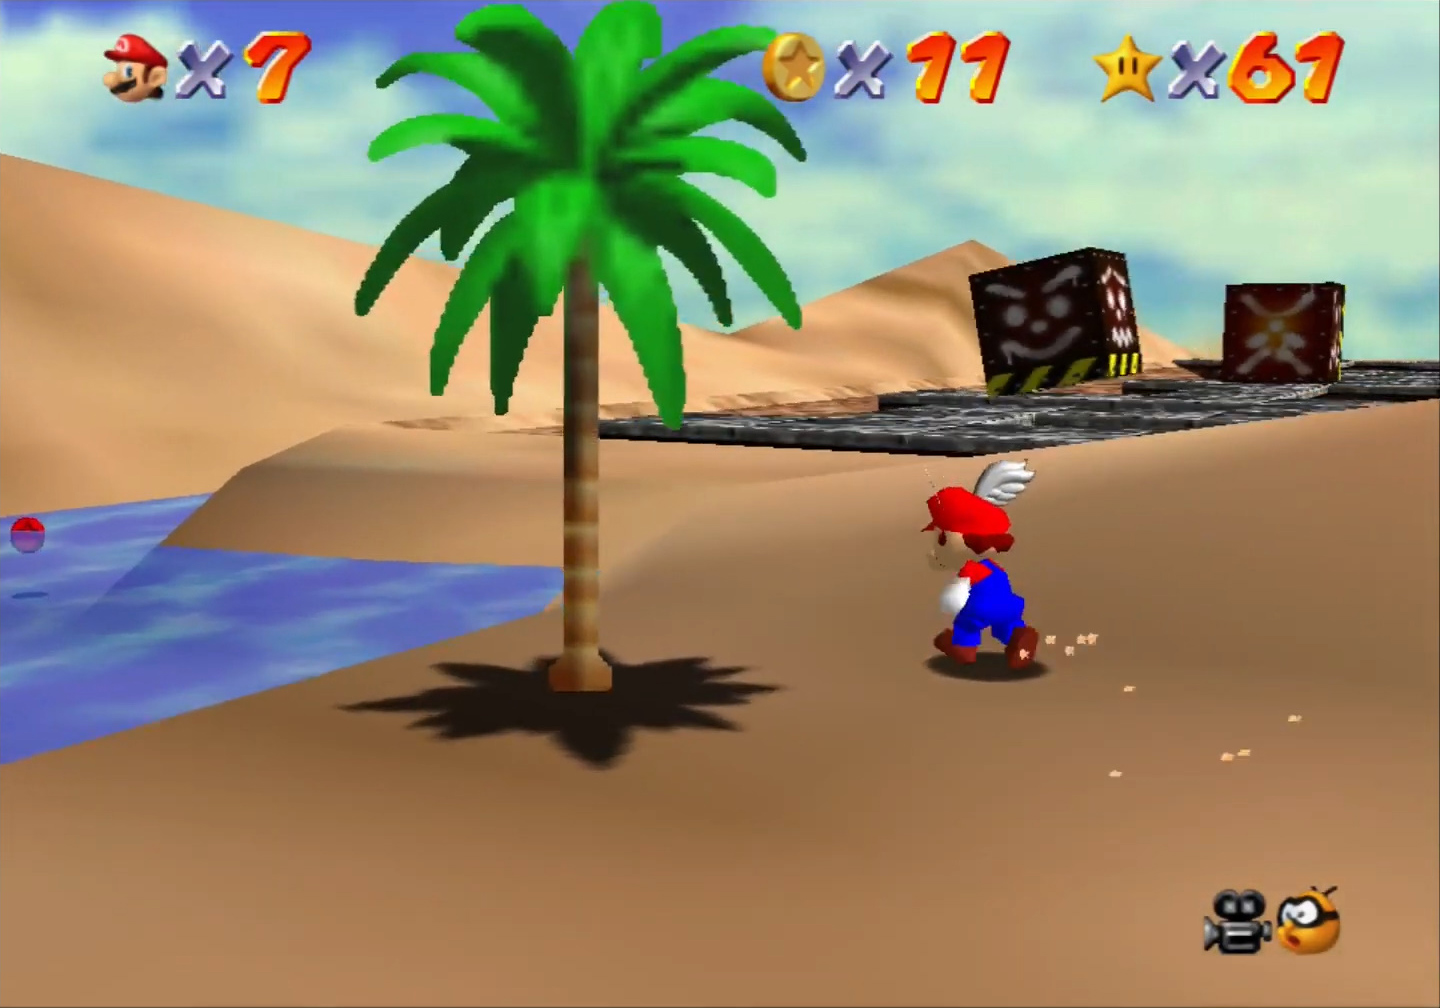 Super Mario 64 - 5. Free Flying for 8 Red Coins - Shifting Sand Land 4.